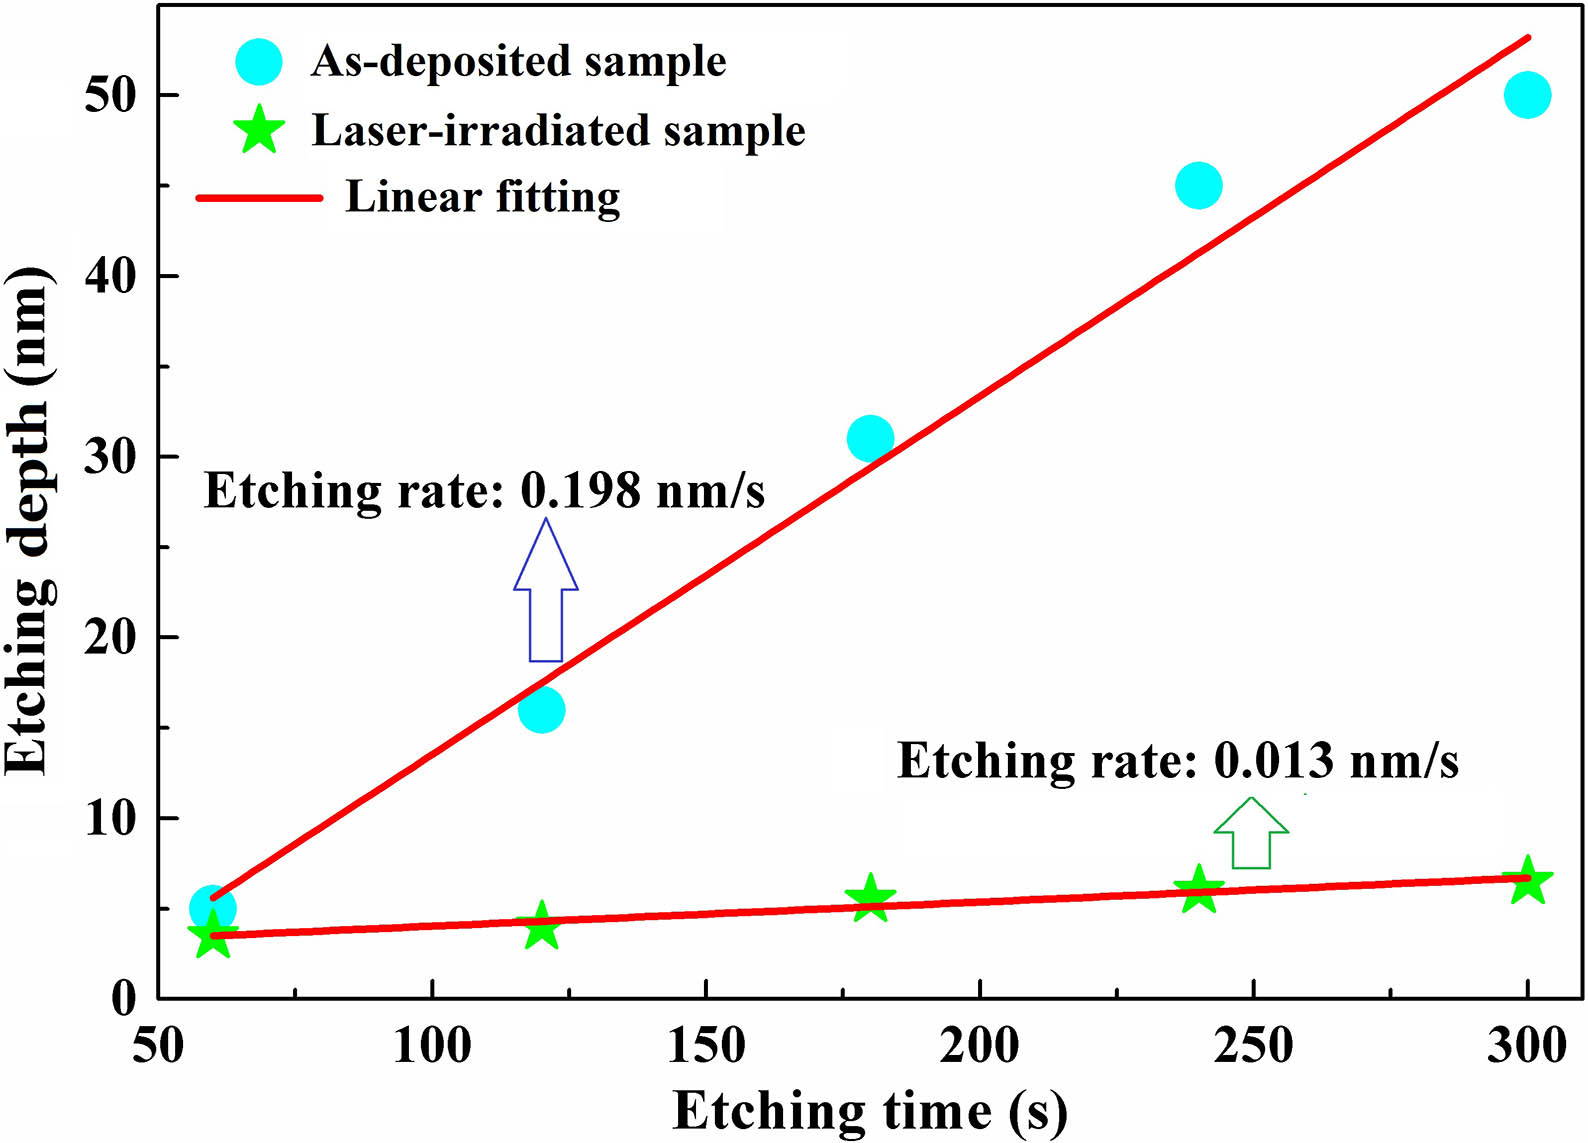 Comparison of wet-etching selectivity in 17% (NH4)2S solution between as-deposited and laser-irradiated SbBi thin films. The laser irradiation power is fixed at 2 mW.